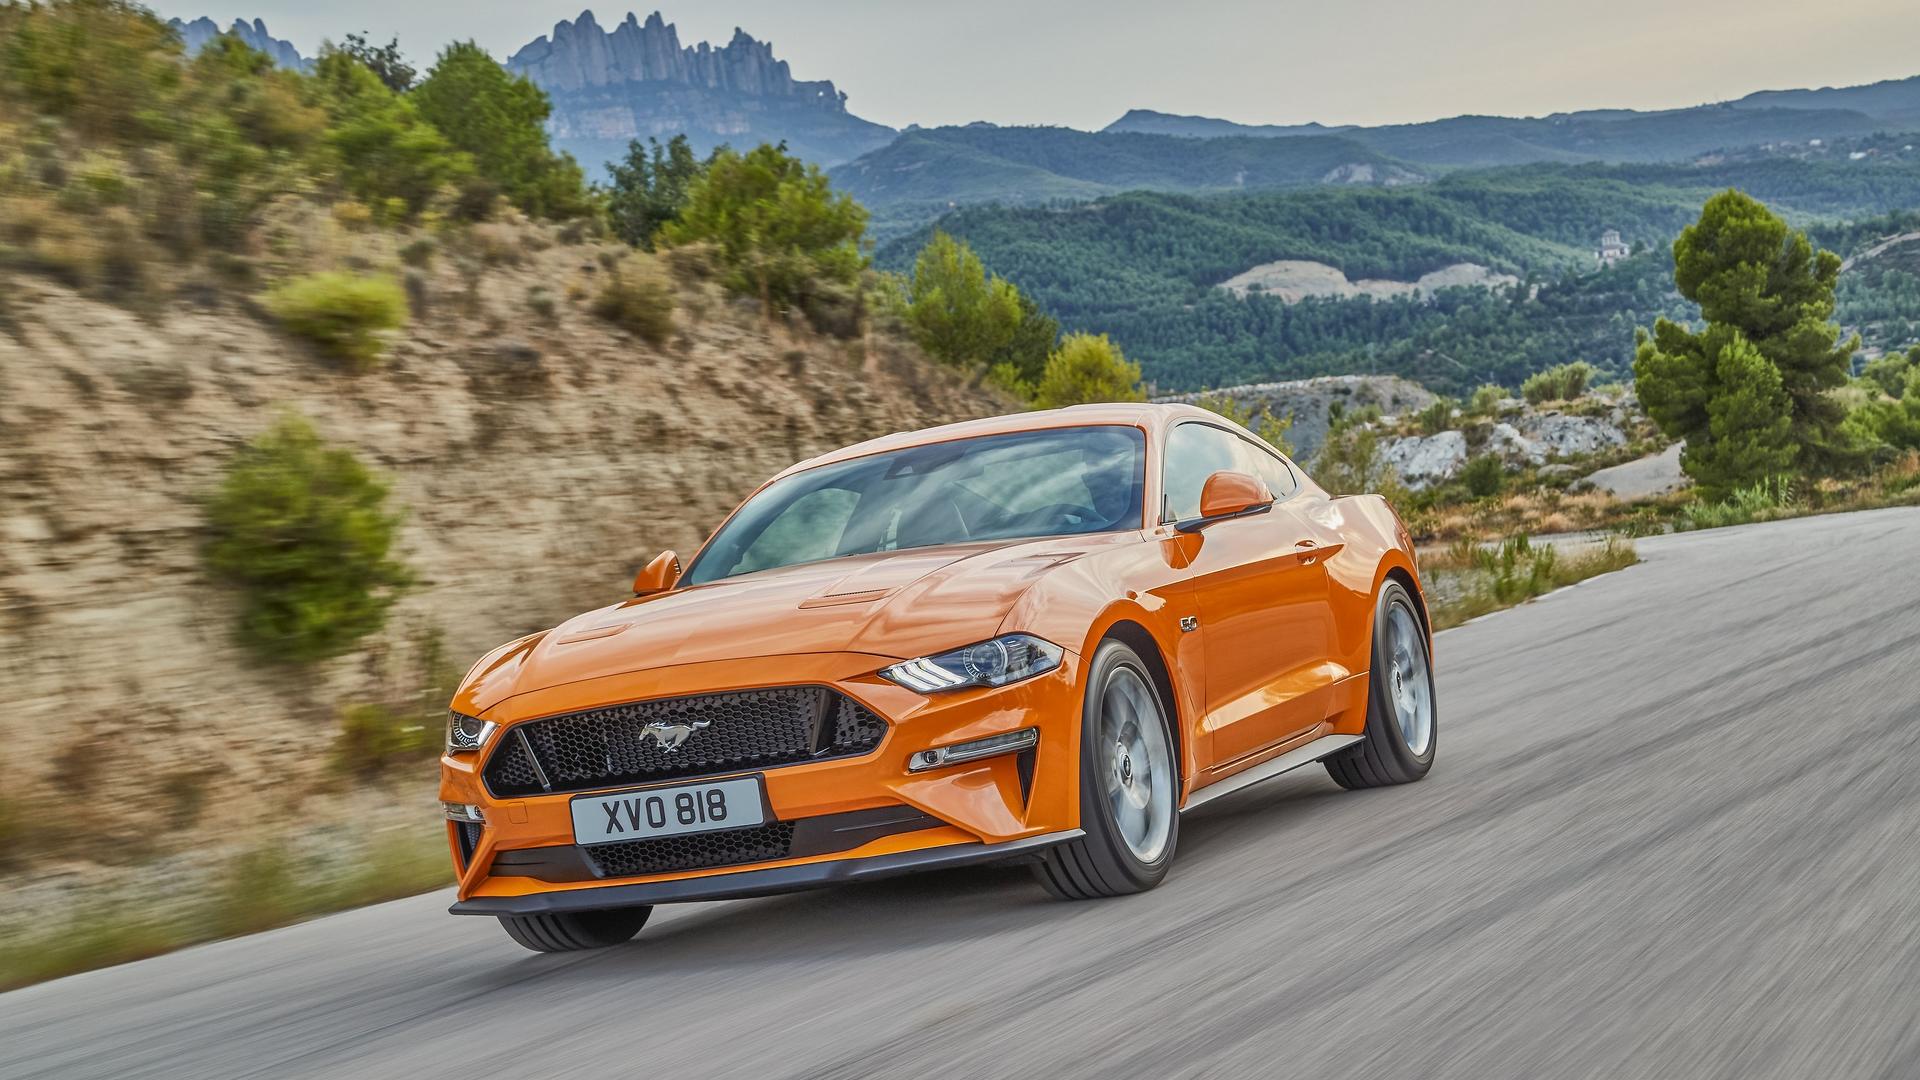 Ford Mustang 2018: Η ευρωπαϊκή πρεμιέρα ενός αμερικανοτραφούς muscle car